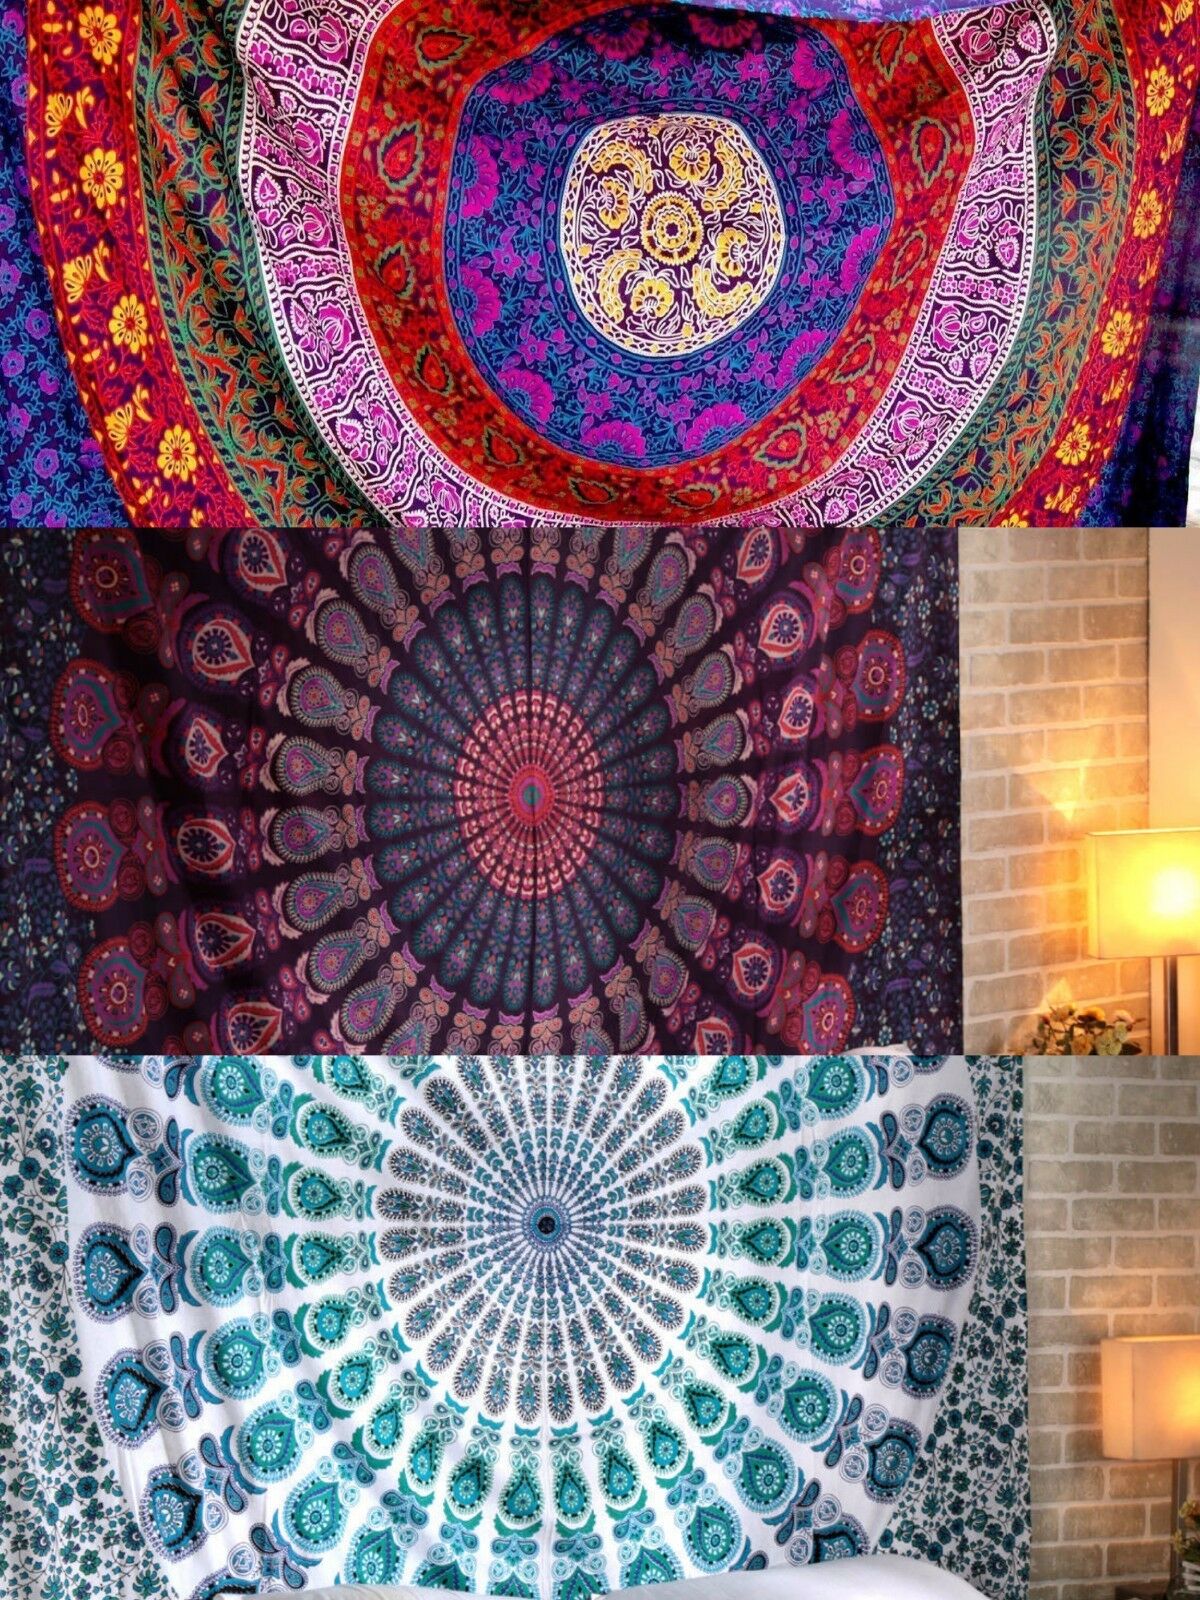 Wholesale Lot Indian Mandala Hippie Wall Hanging Table Cover Tapestry Poster New 